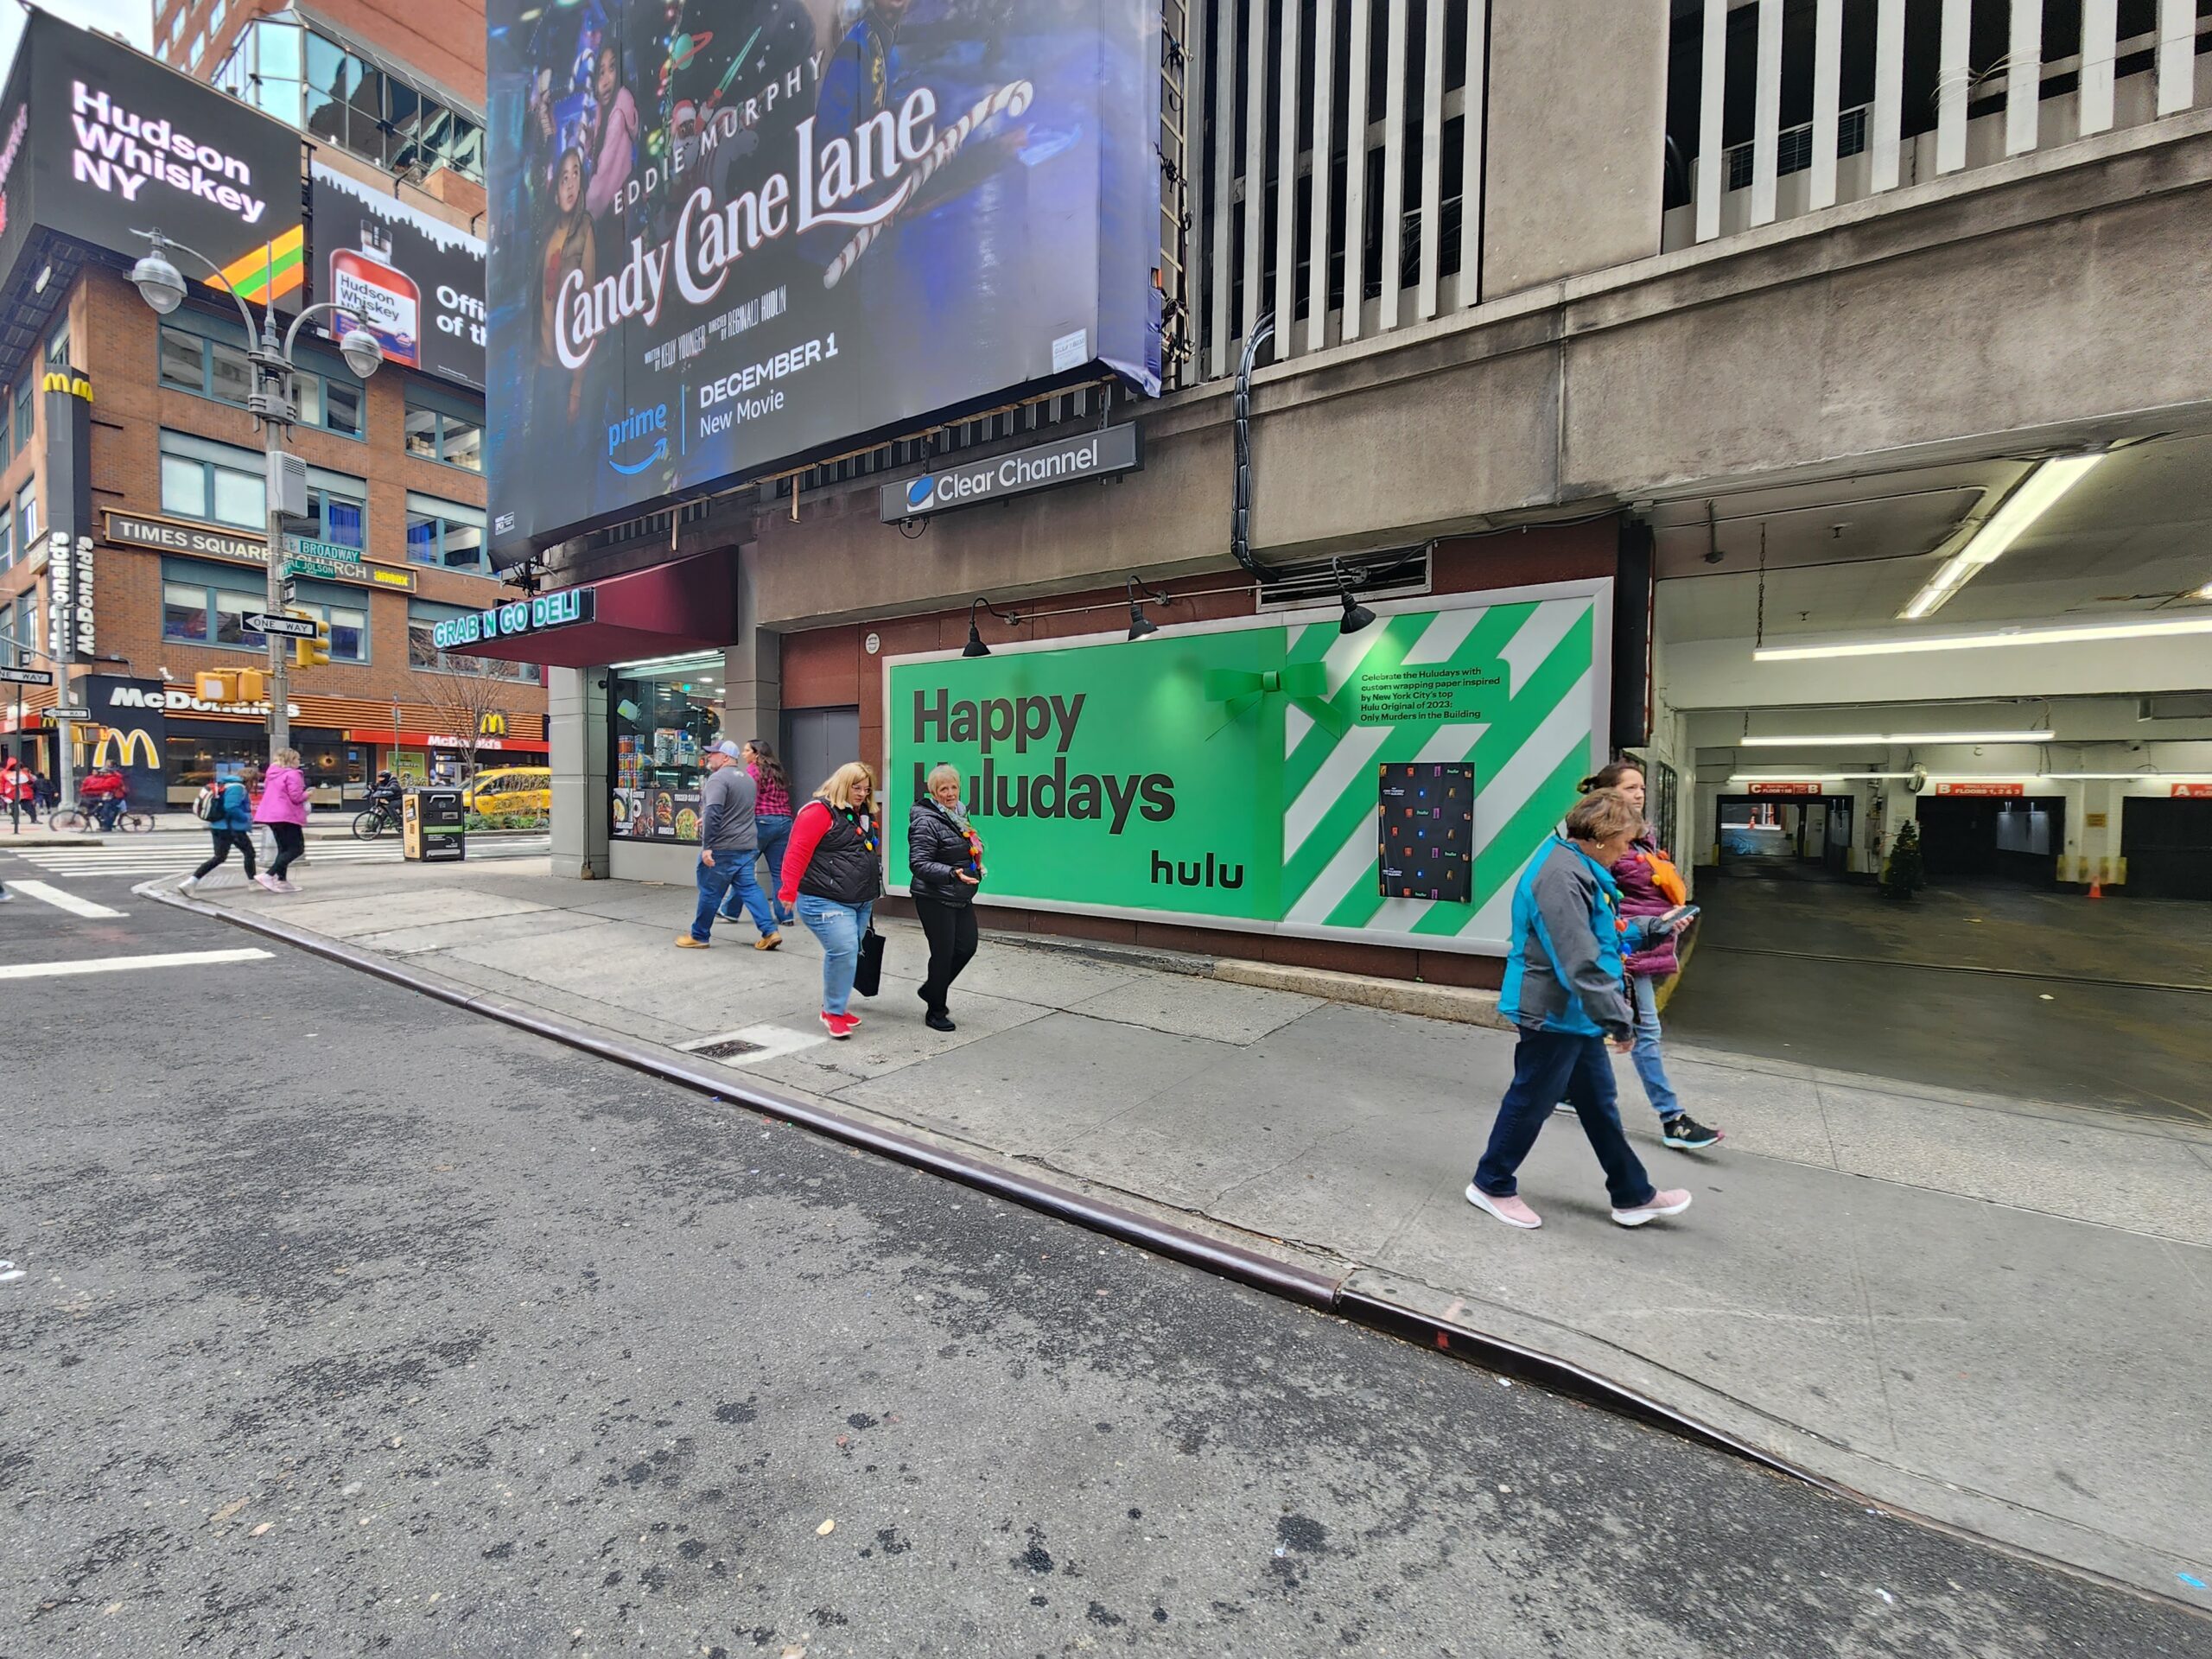 Hulu Holidays Experiential Activation Only Murders in the Building NYC Broadway & 51st St